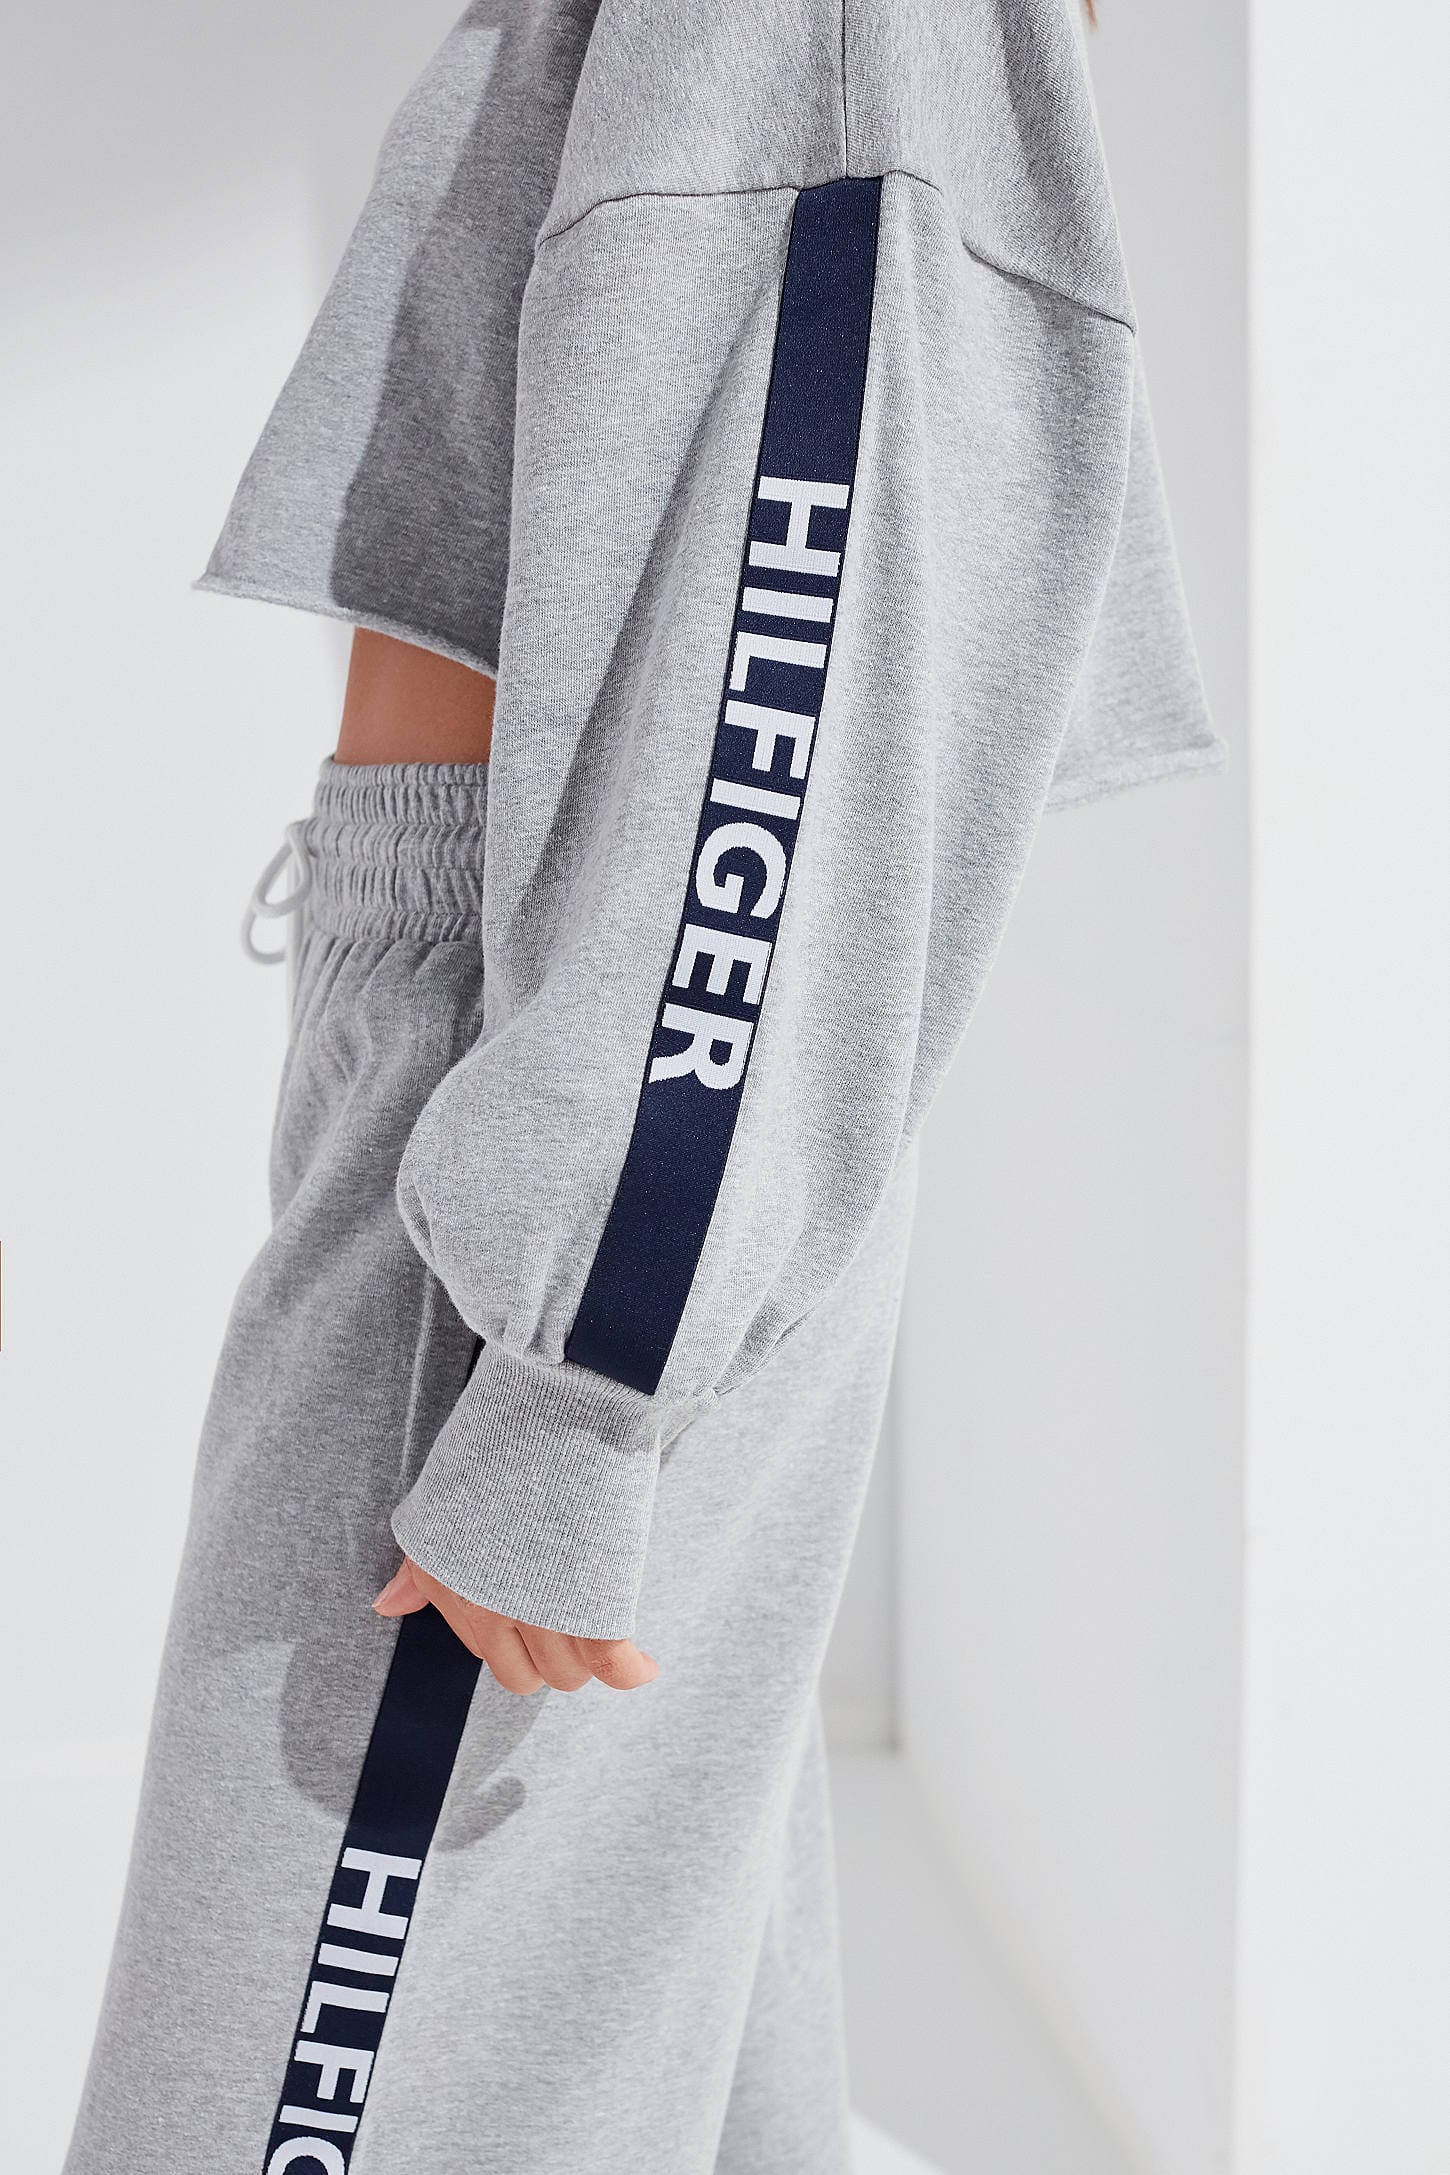 tommy hilfiger sweater and sweatpants